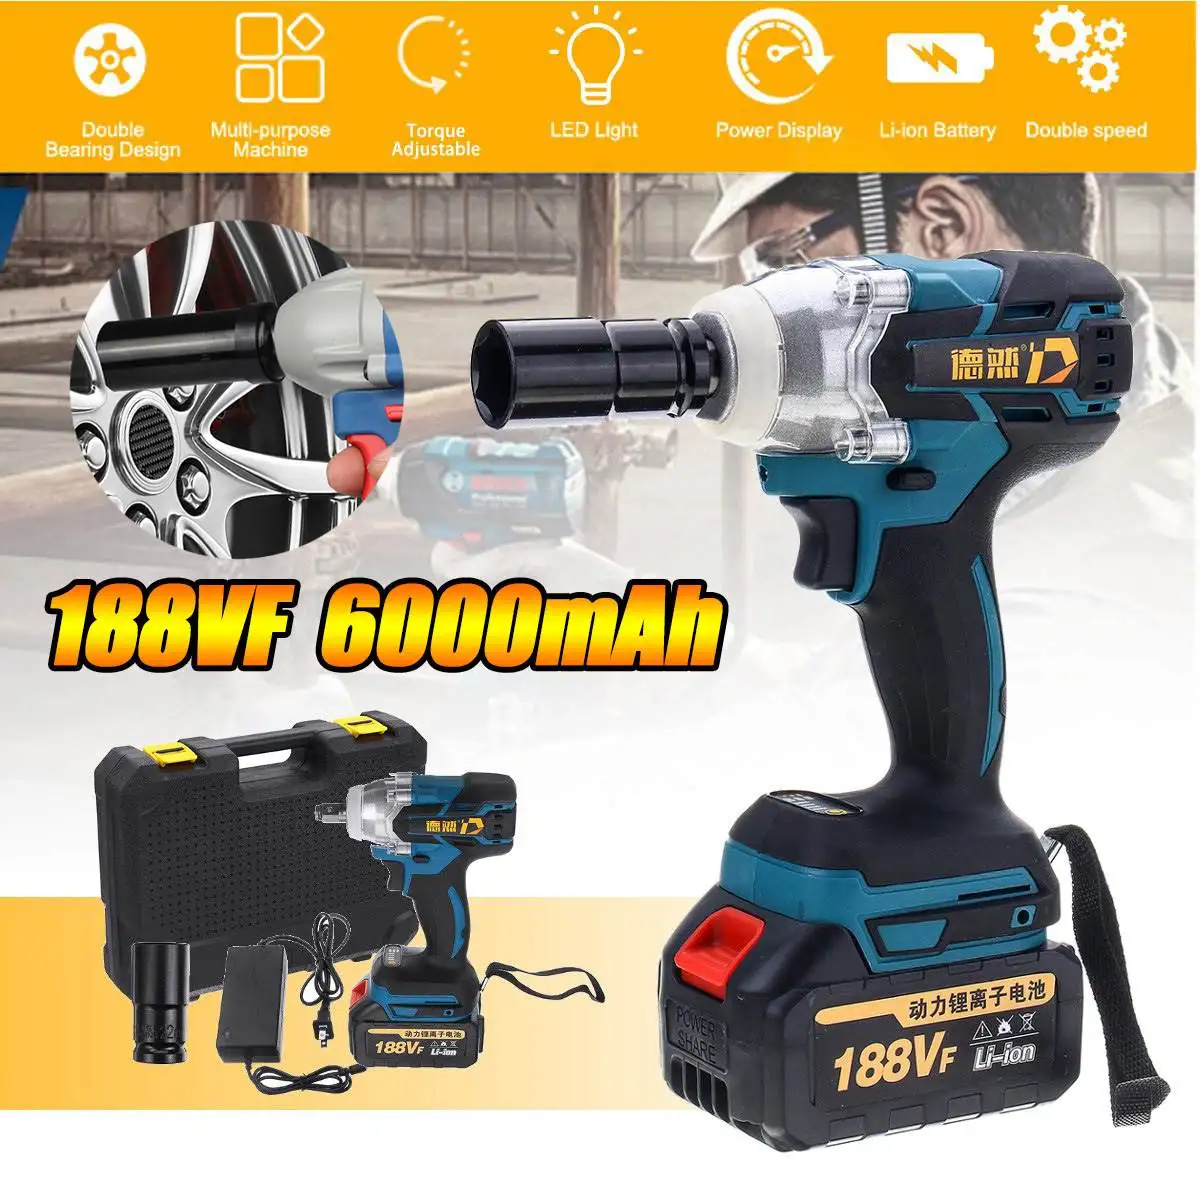 

188VF 6000mAh 380N.m Lithium-Ion Battery Electric Cordless Impact Wrench Drill Driver Kit Tools